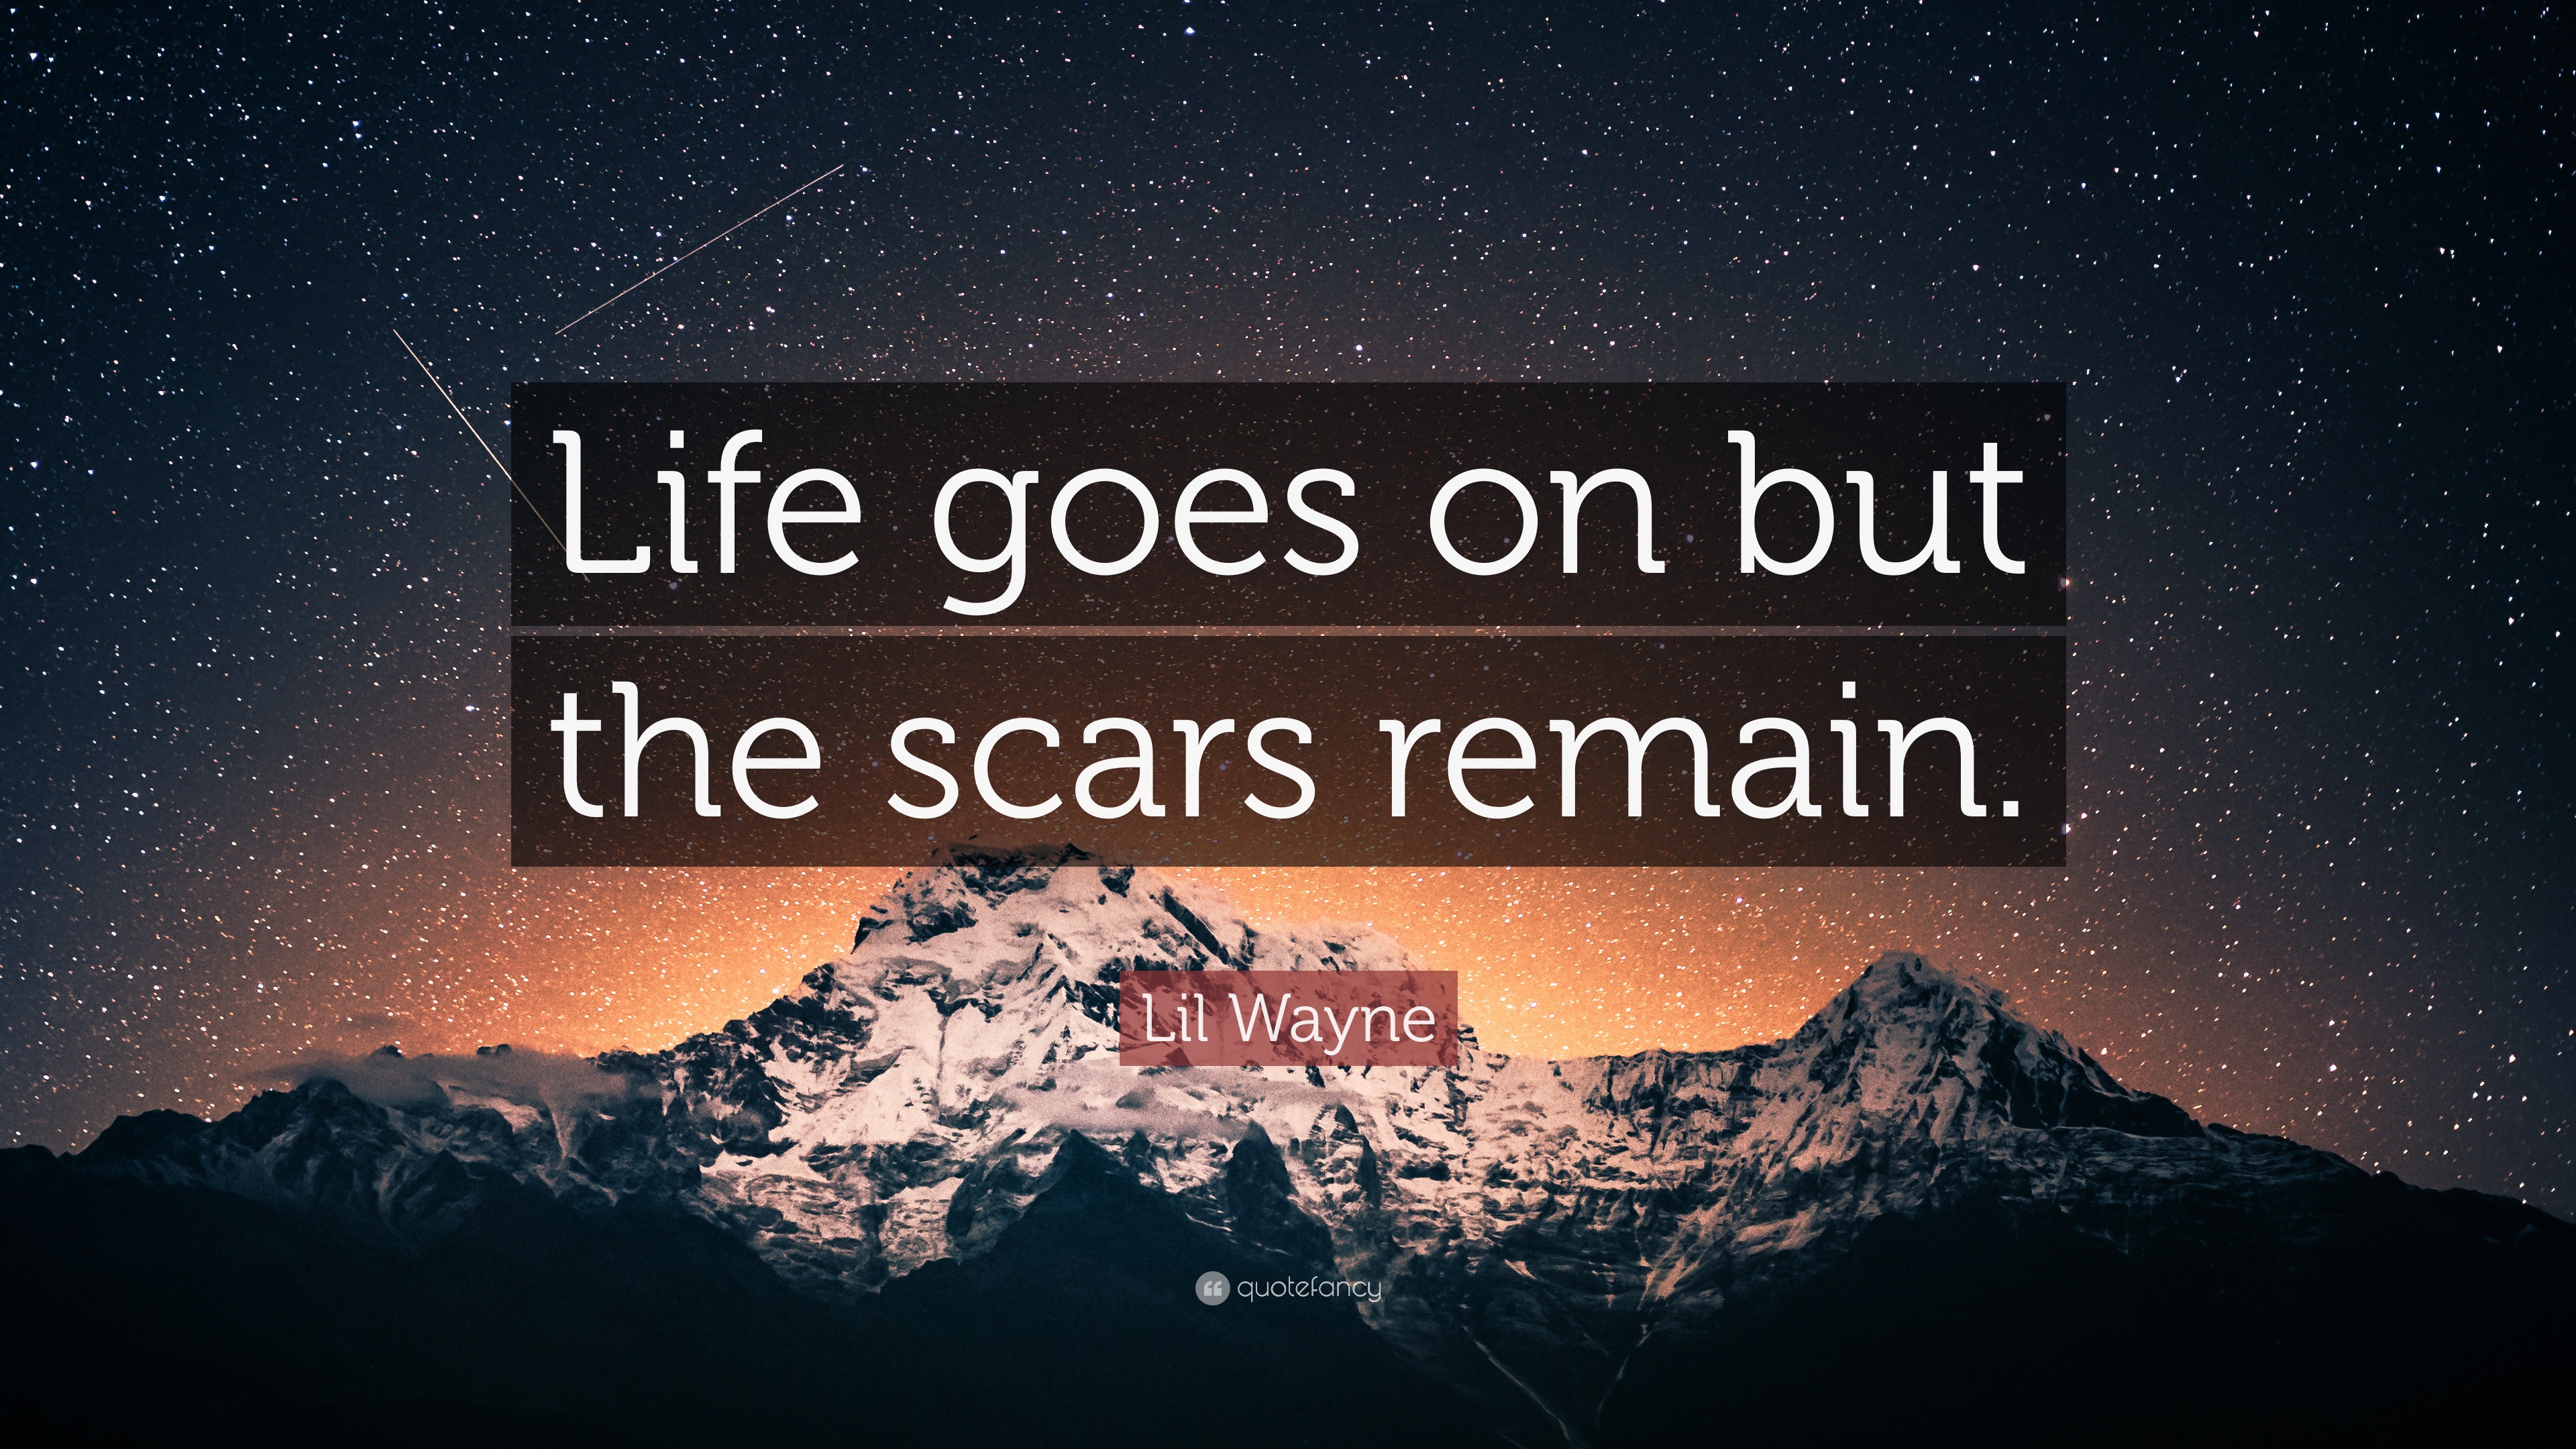 Lil Wayne Quote Life goes on but the scars remain